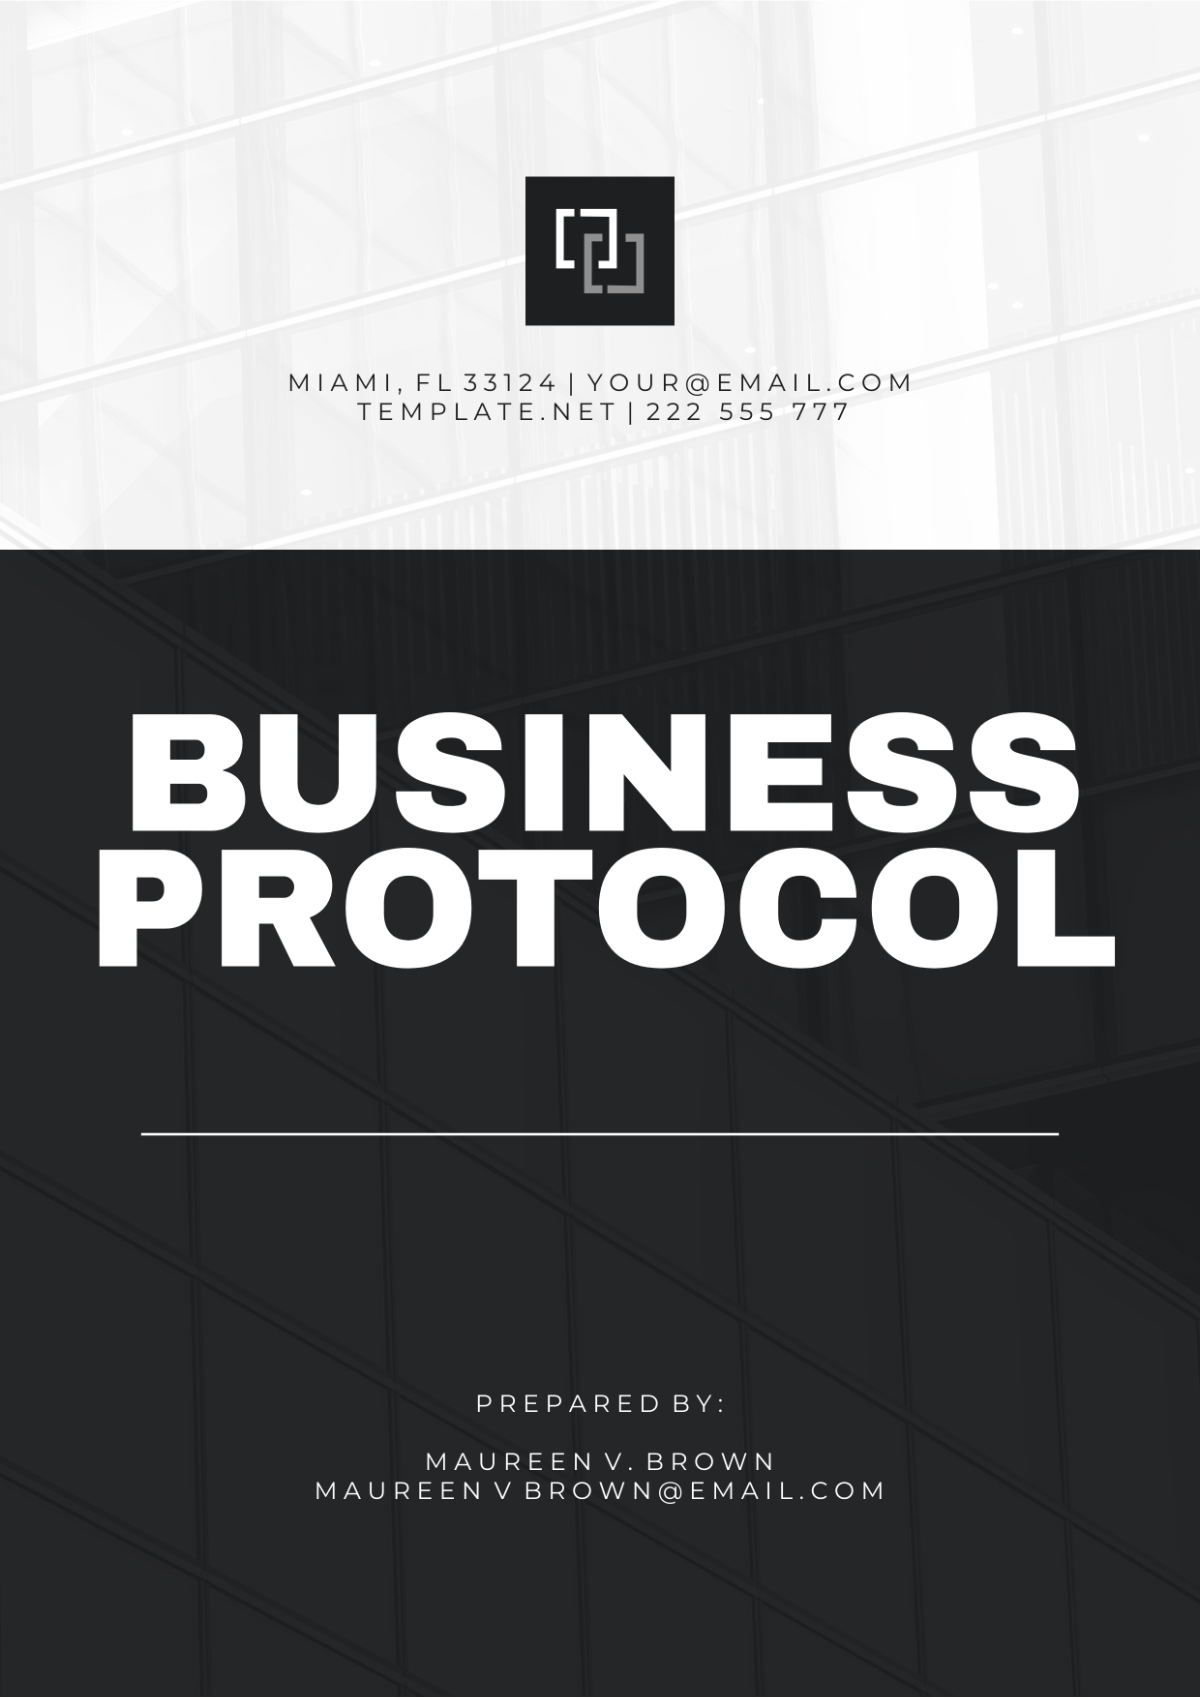 Business Protocol Template